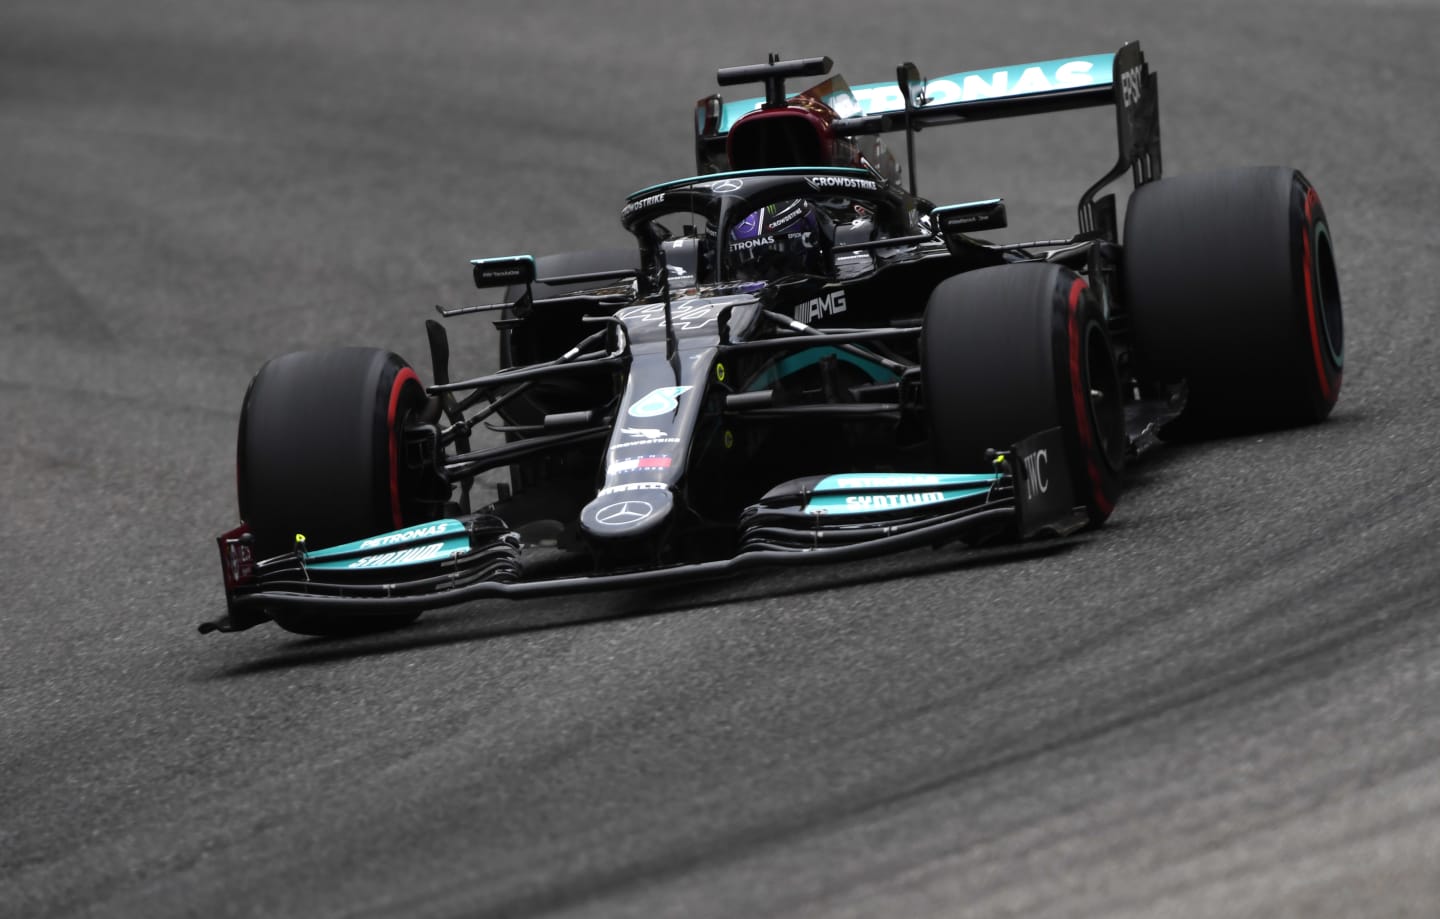 MONZA, ITALY - SEPTEMBER 10: Lewis Hamilton of Great Britain driving the (44) Mercedes AMG Petronas F1 Team Mercedes W12 during qualifying ahead of the F1 Grand Prix of Italy at Autodromo di Monza on September 10, 2021 in Monza, Italy. (Photo by Rudy Carezzevoli/Getty Images)